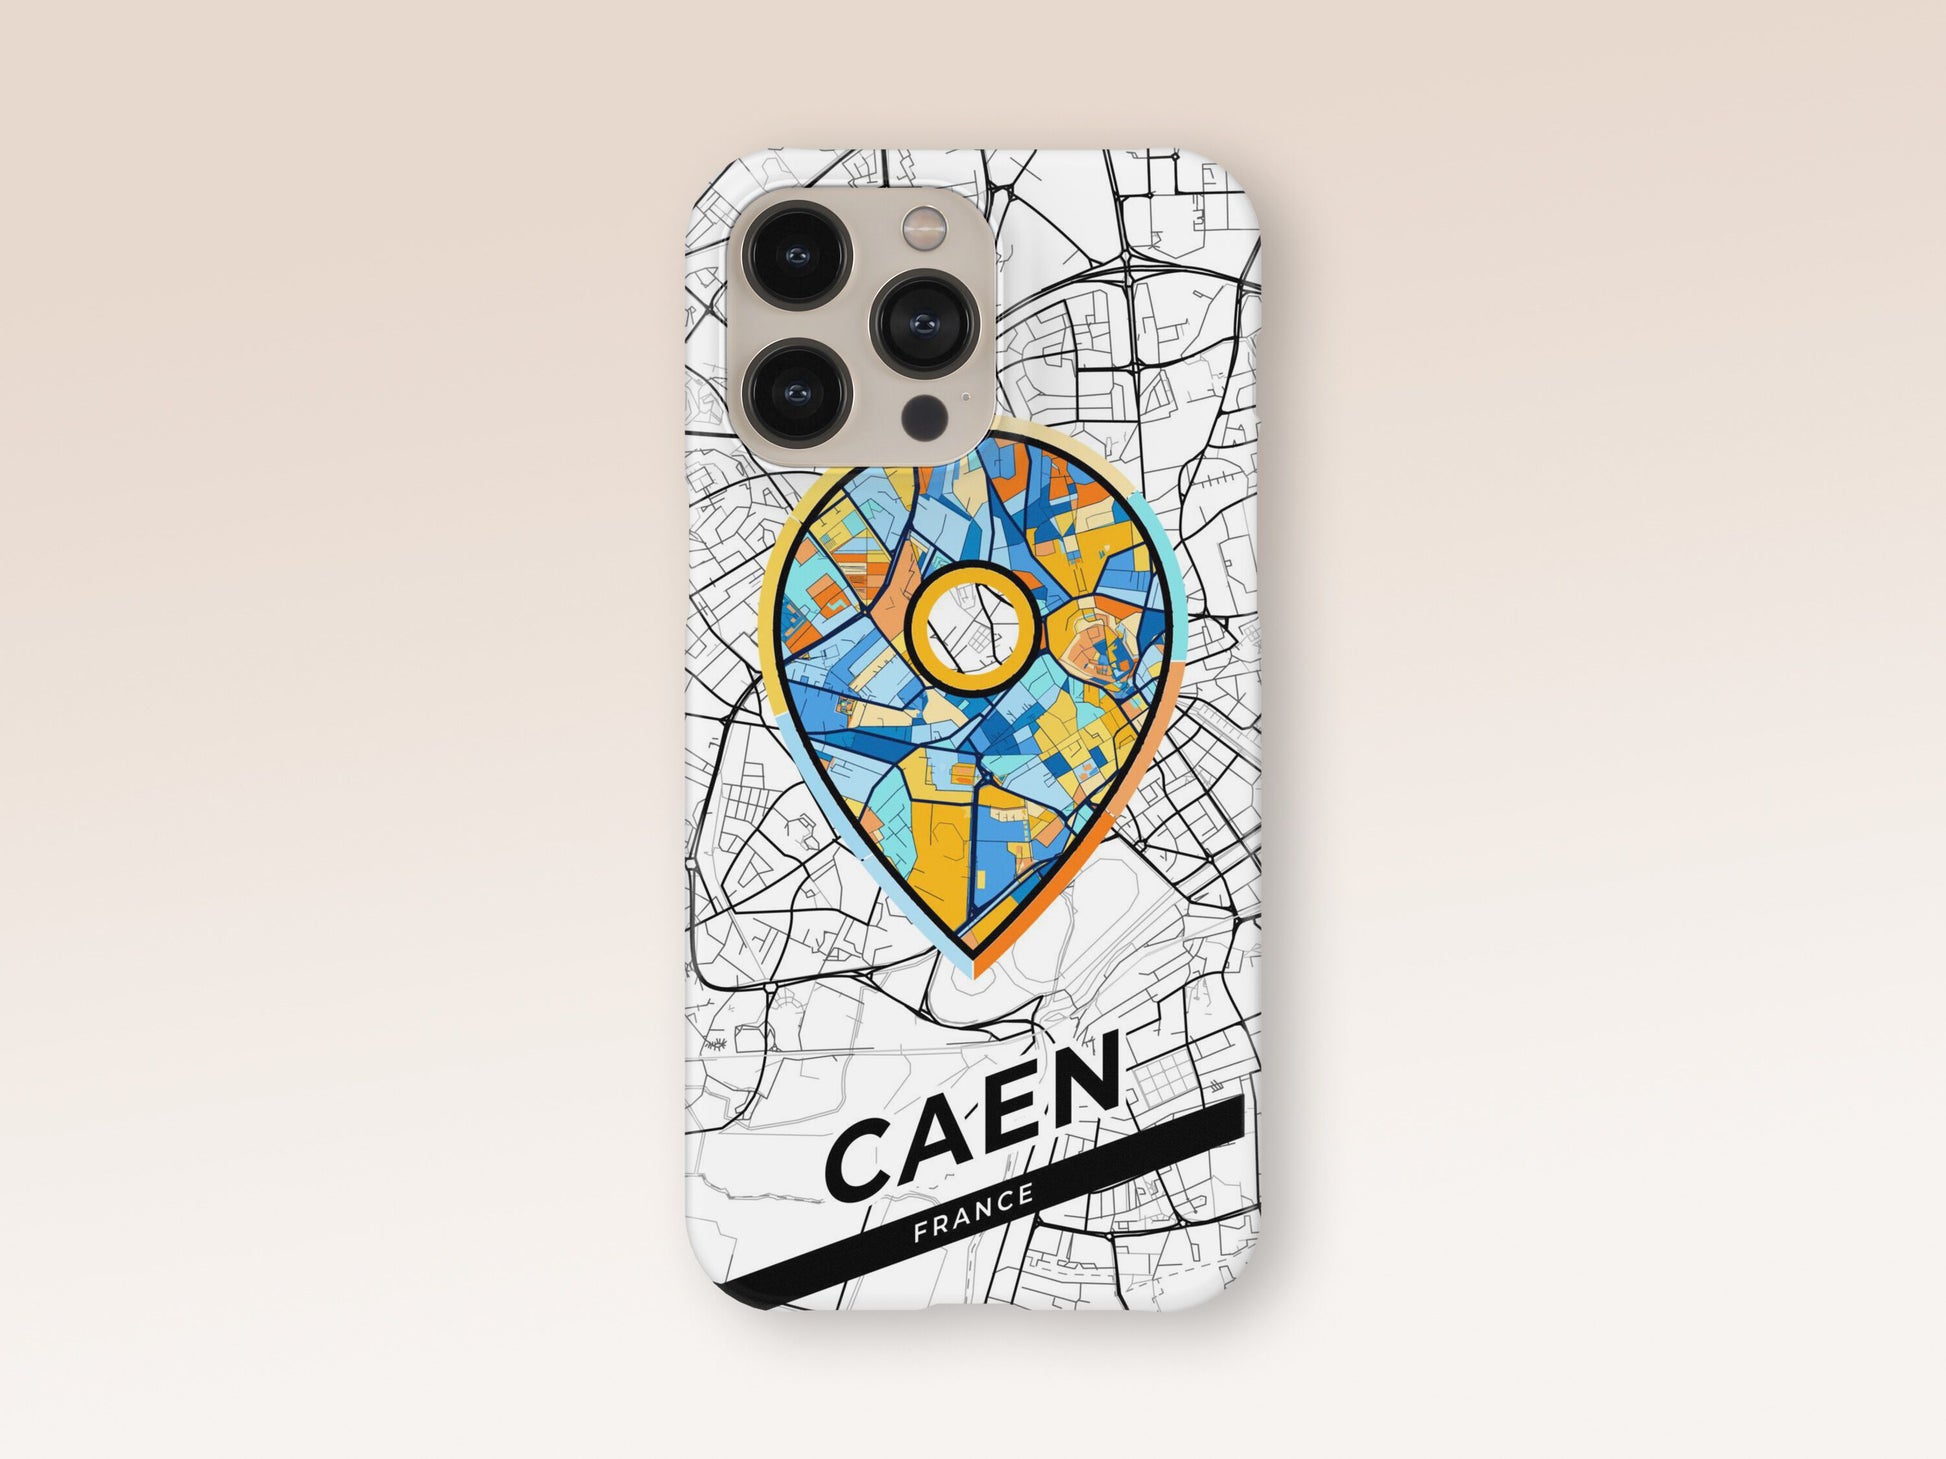 Caen France slim phone case with colorful icon. Birthday, wedding or housewarming gift. Couple match cases. 1